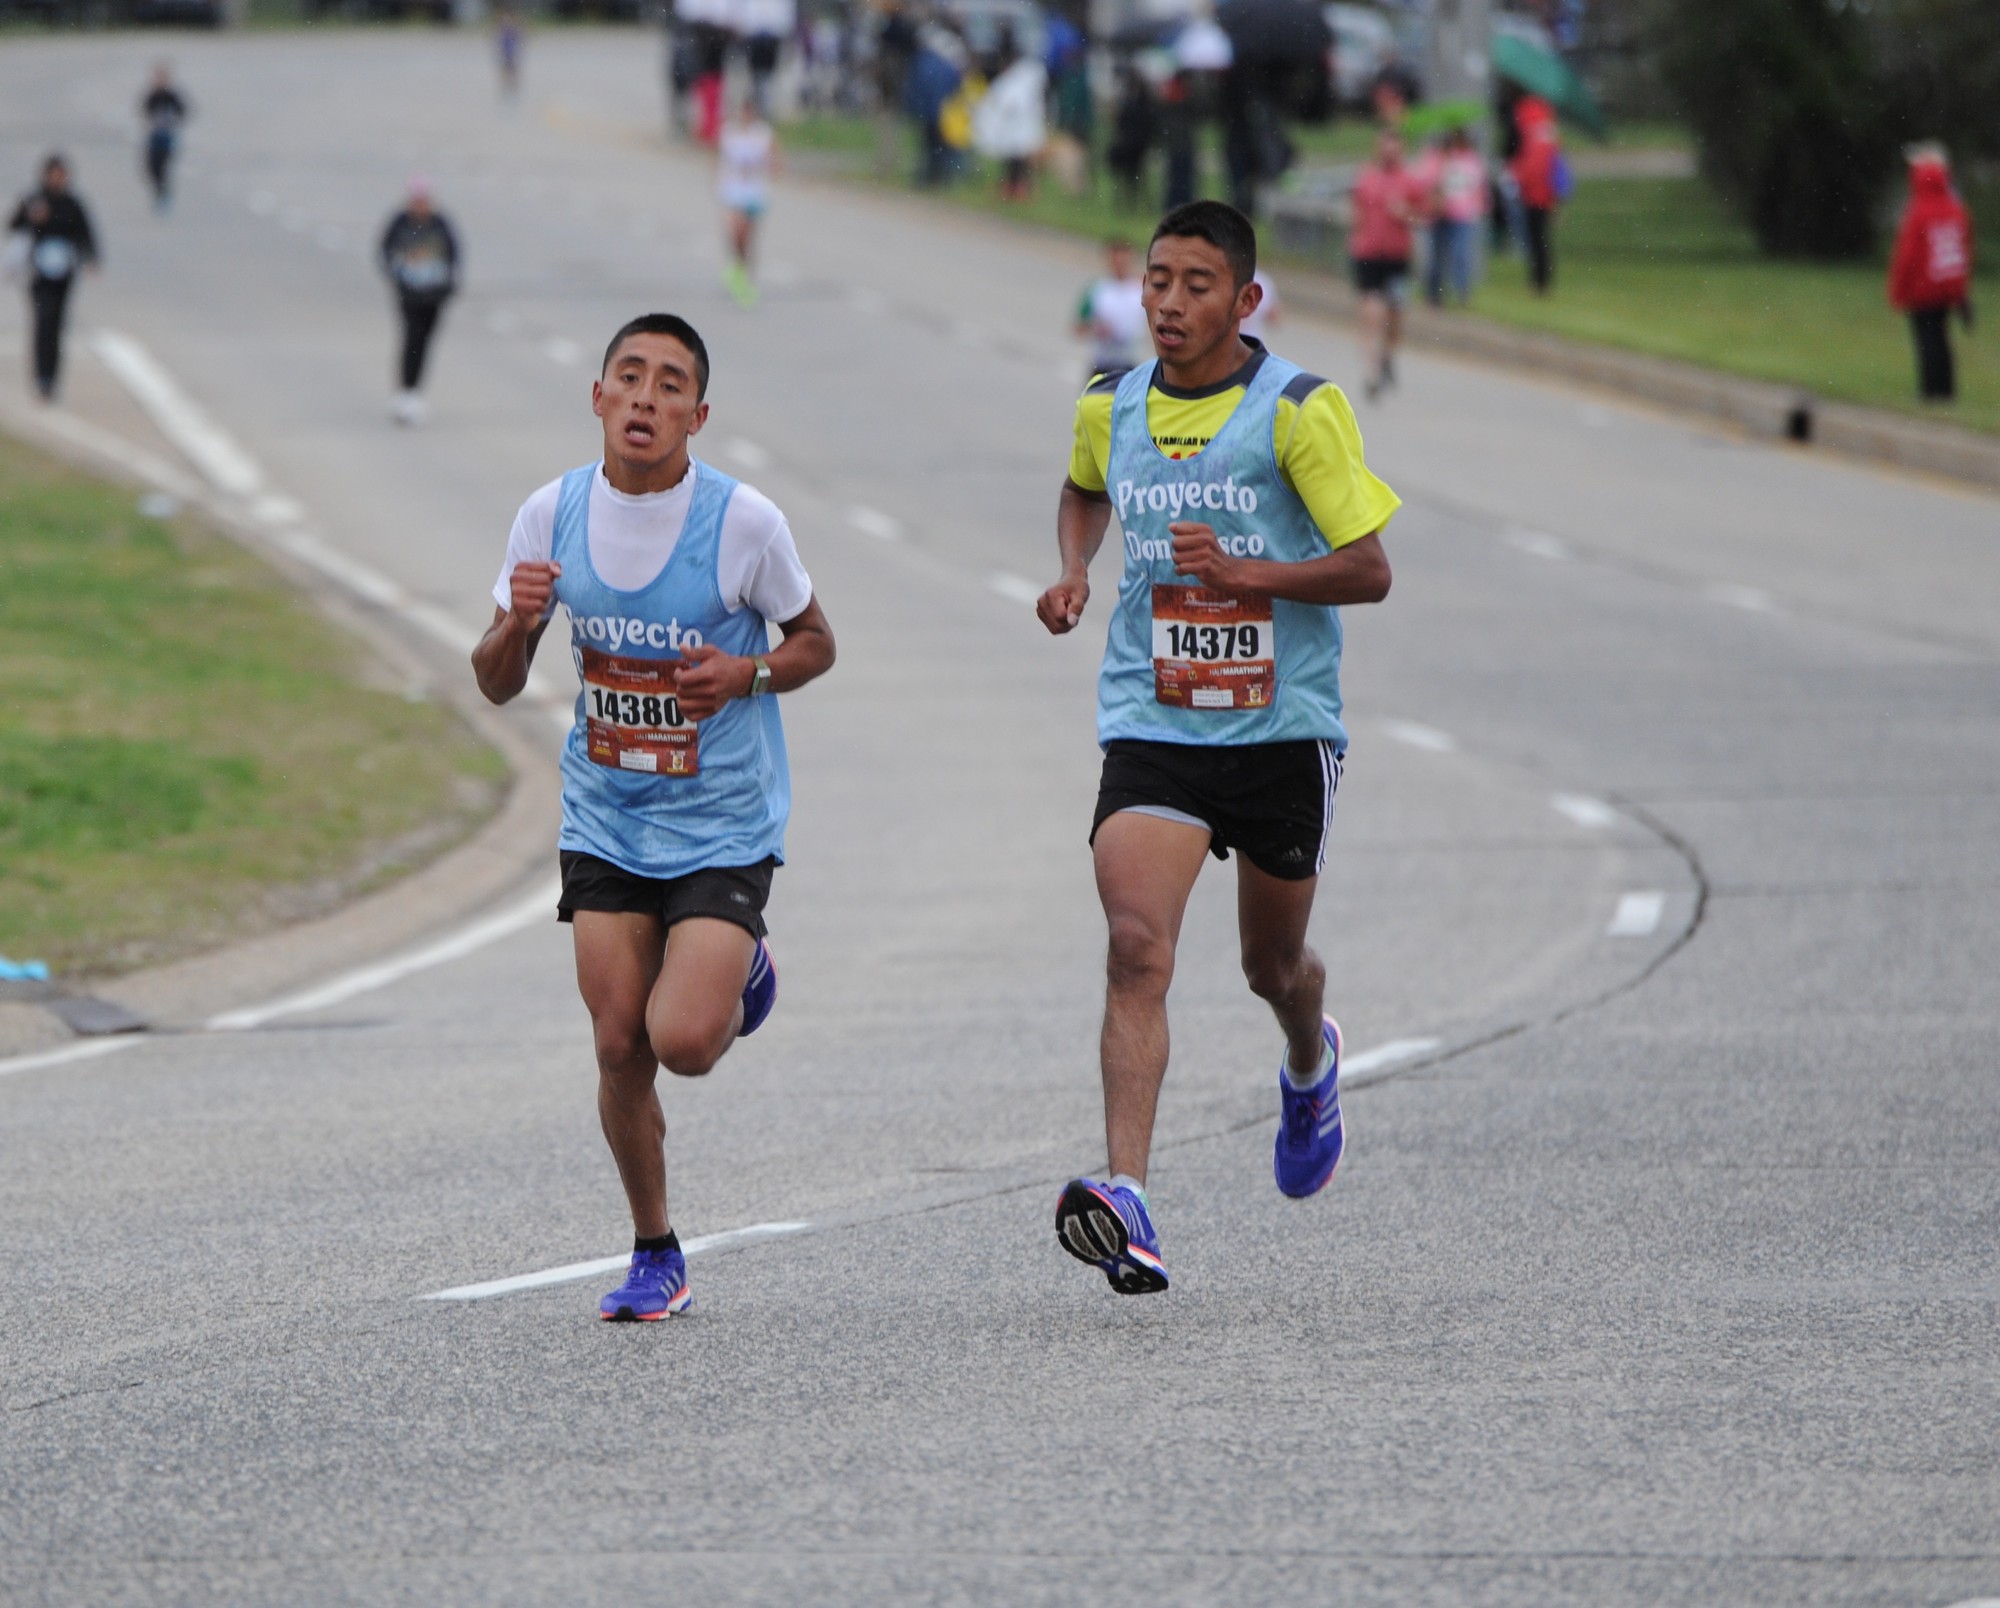 Brothers Wilson, left, and Erick Chavez Chox raced toward the finish line during last Sunday’s half-marathon. Erick won the race, and Wilson finished second.